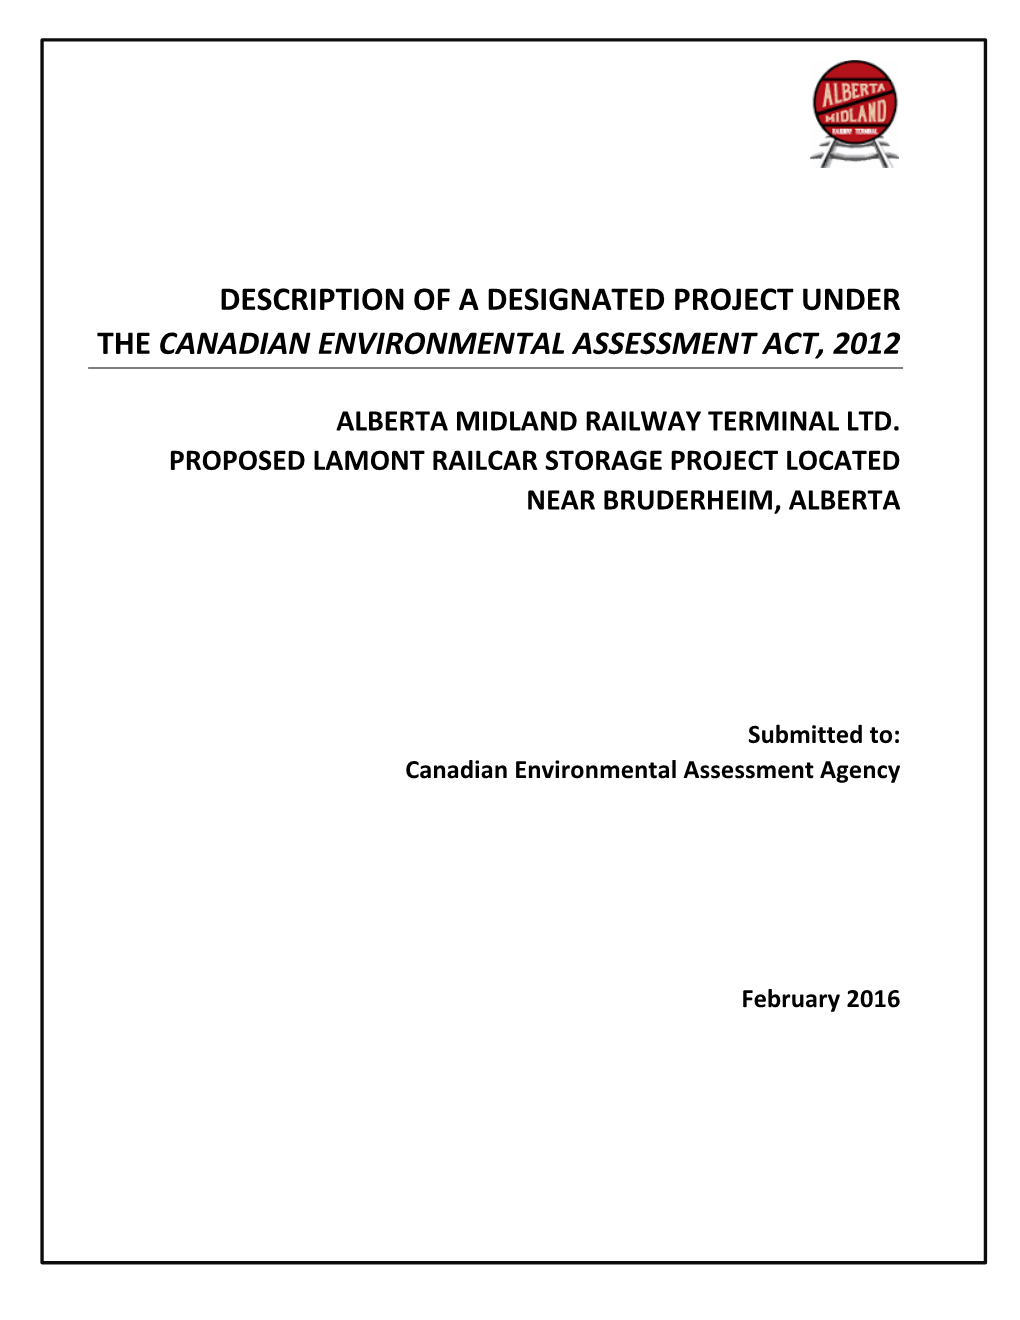 Description of a Designated Project Under the Canadian Environmental Assessment Act, 2012